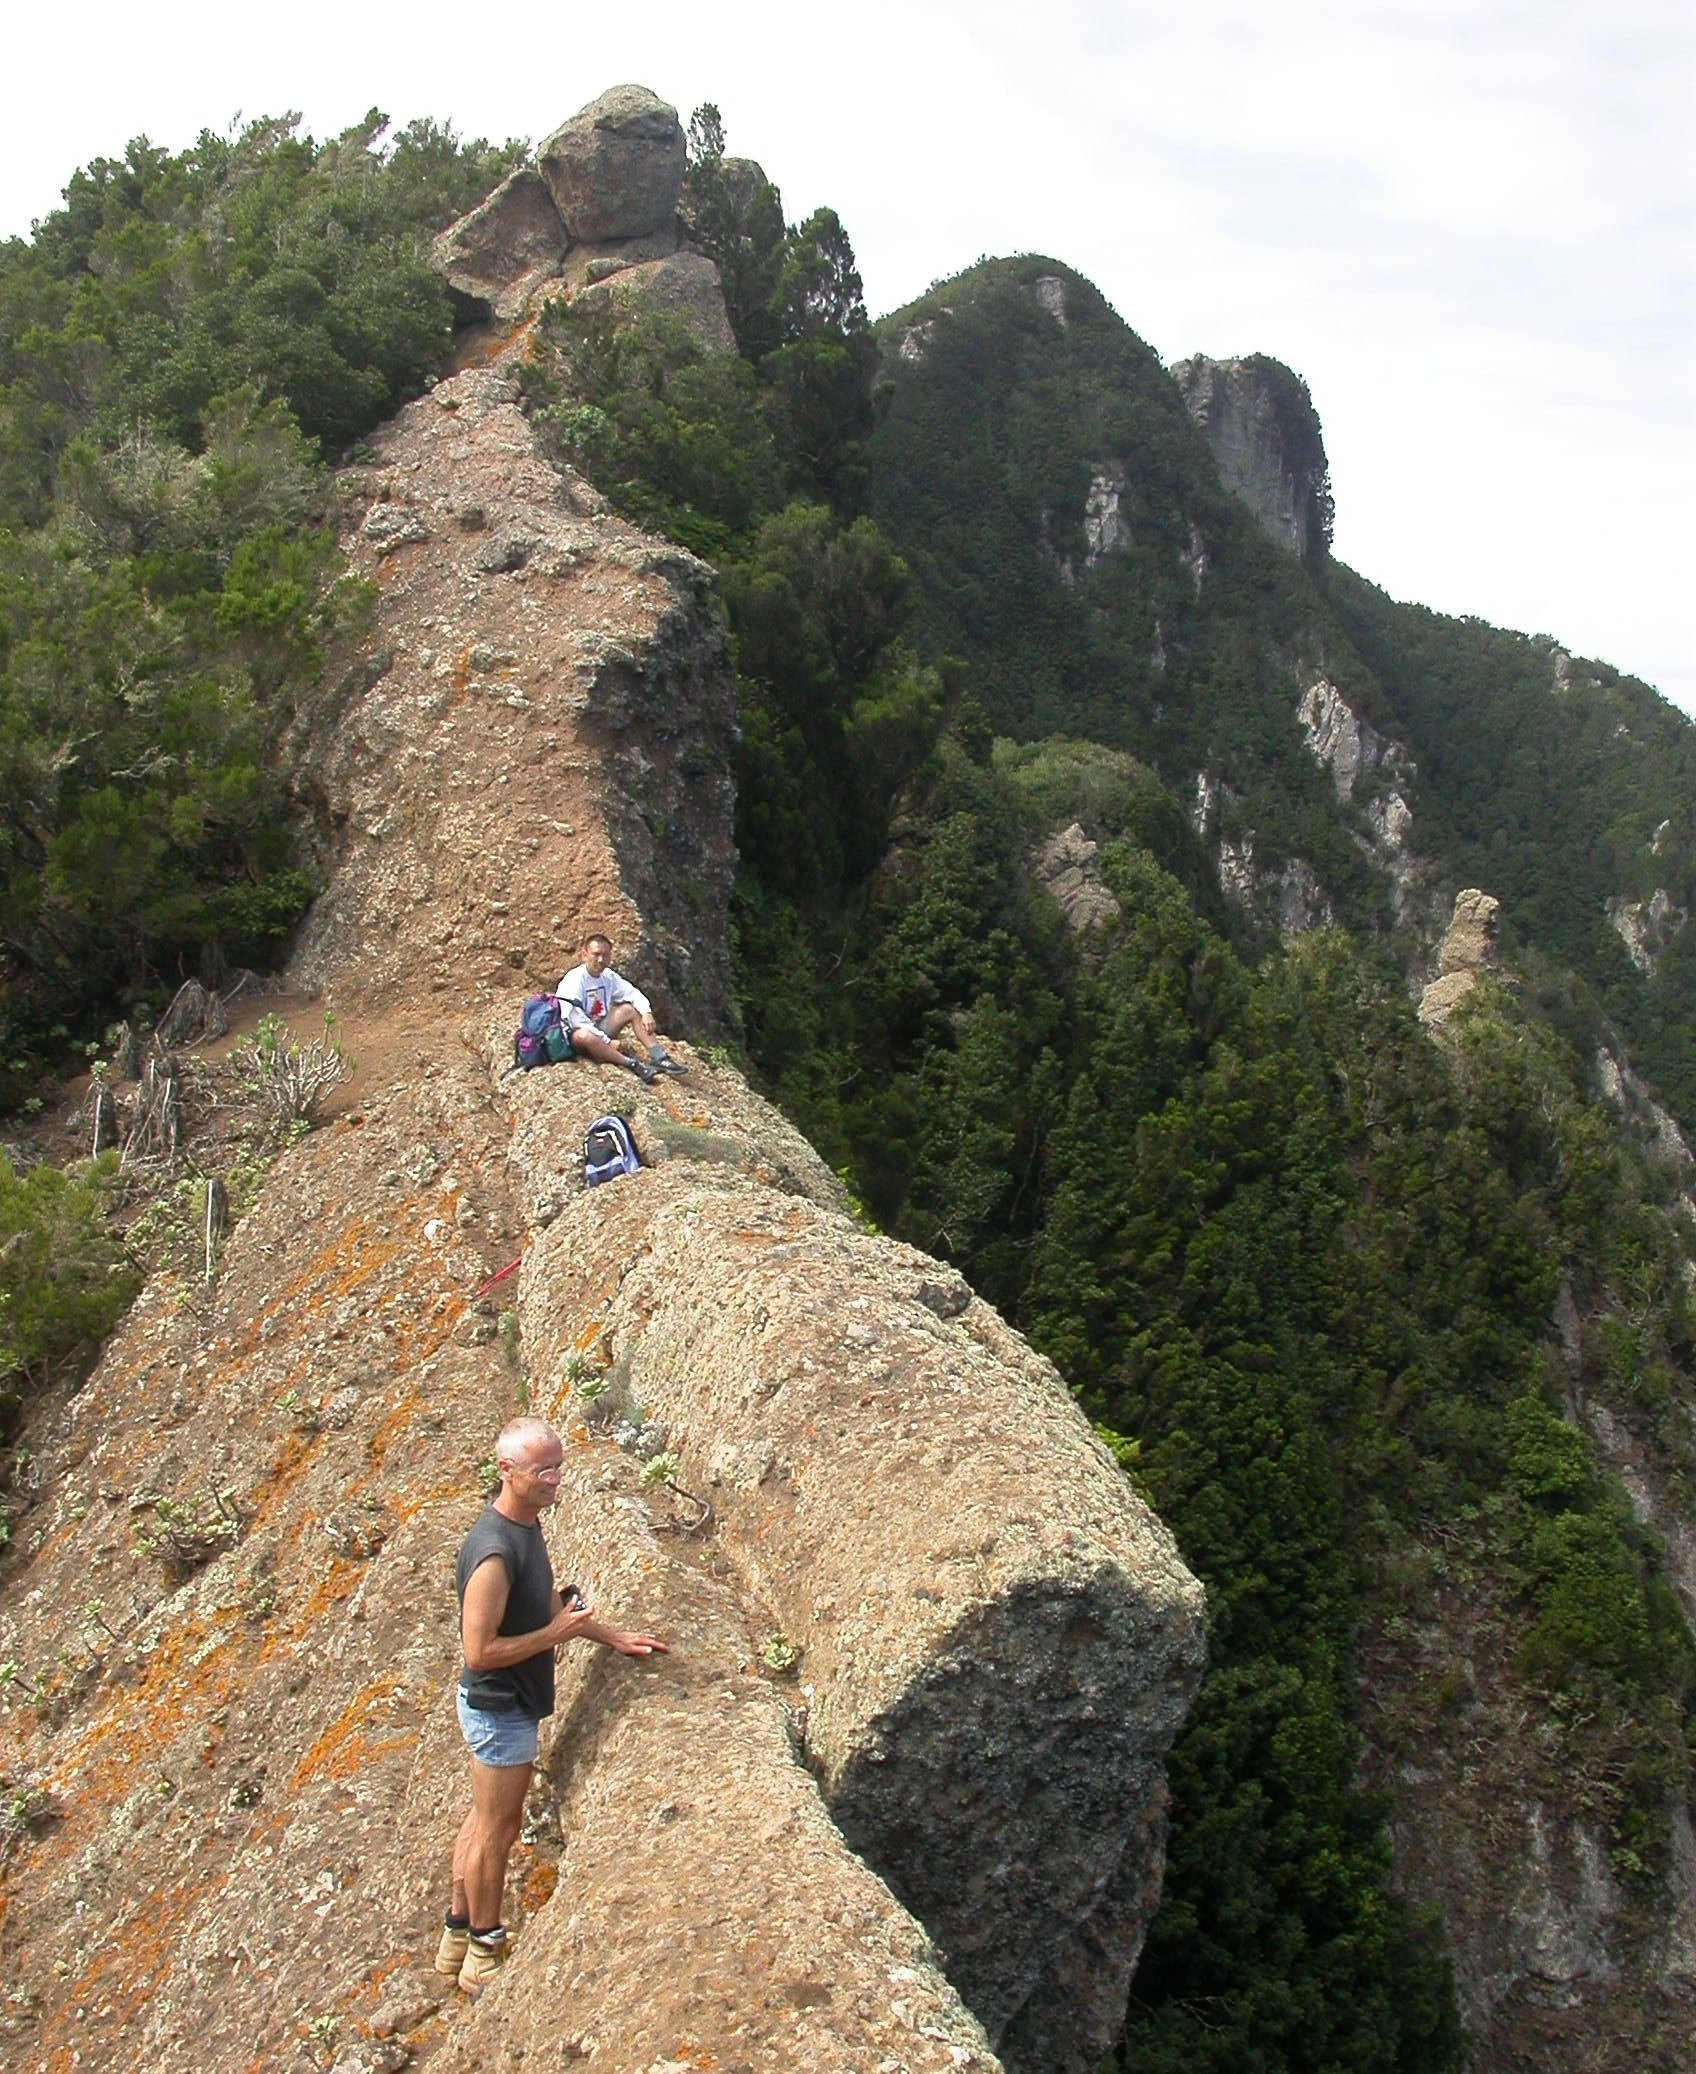 A group of people climbing a rock

Description automatically generated with low confidence